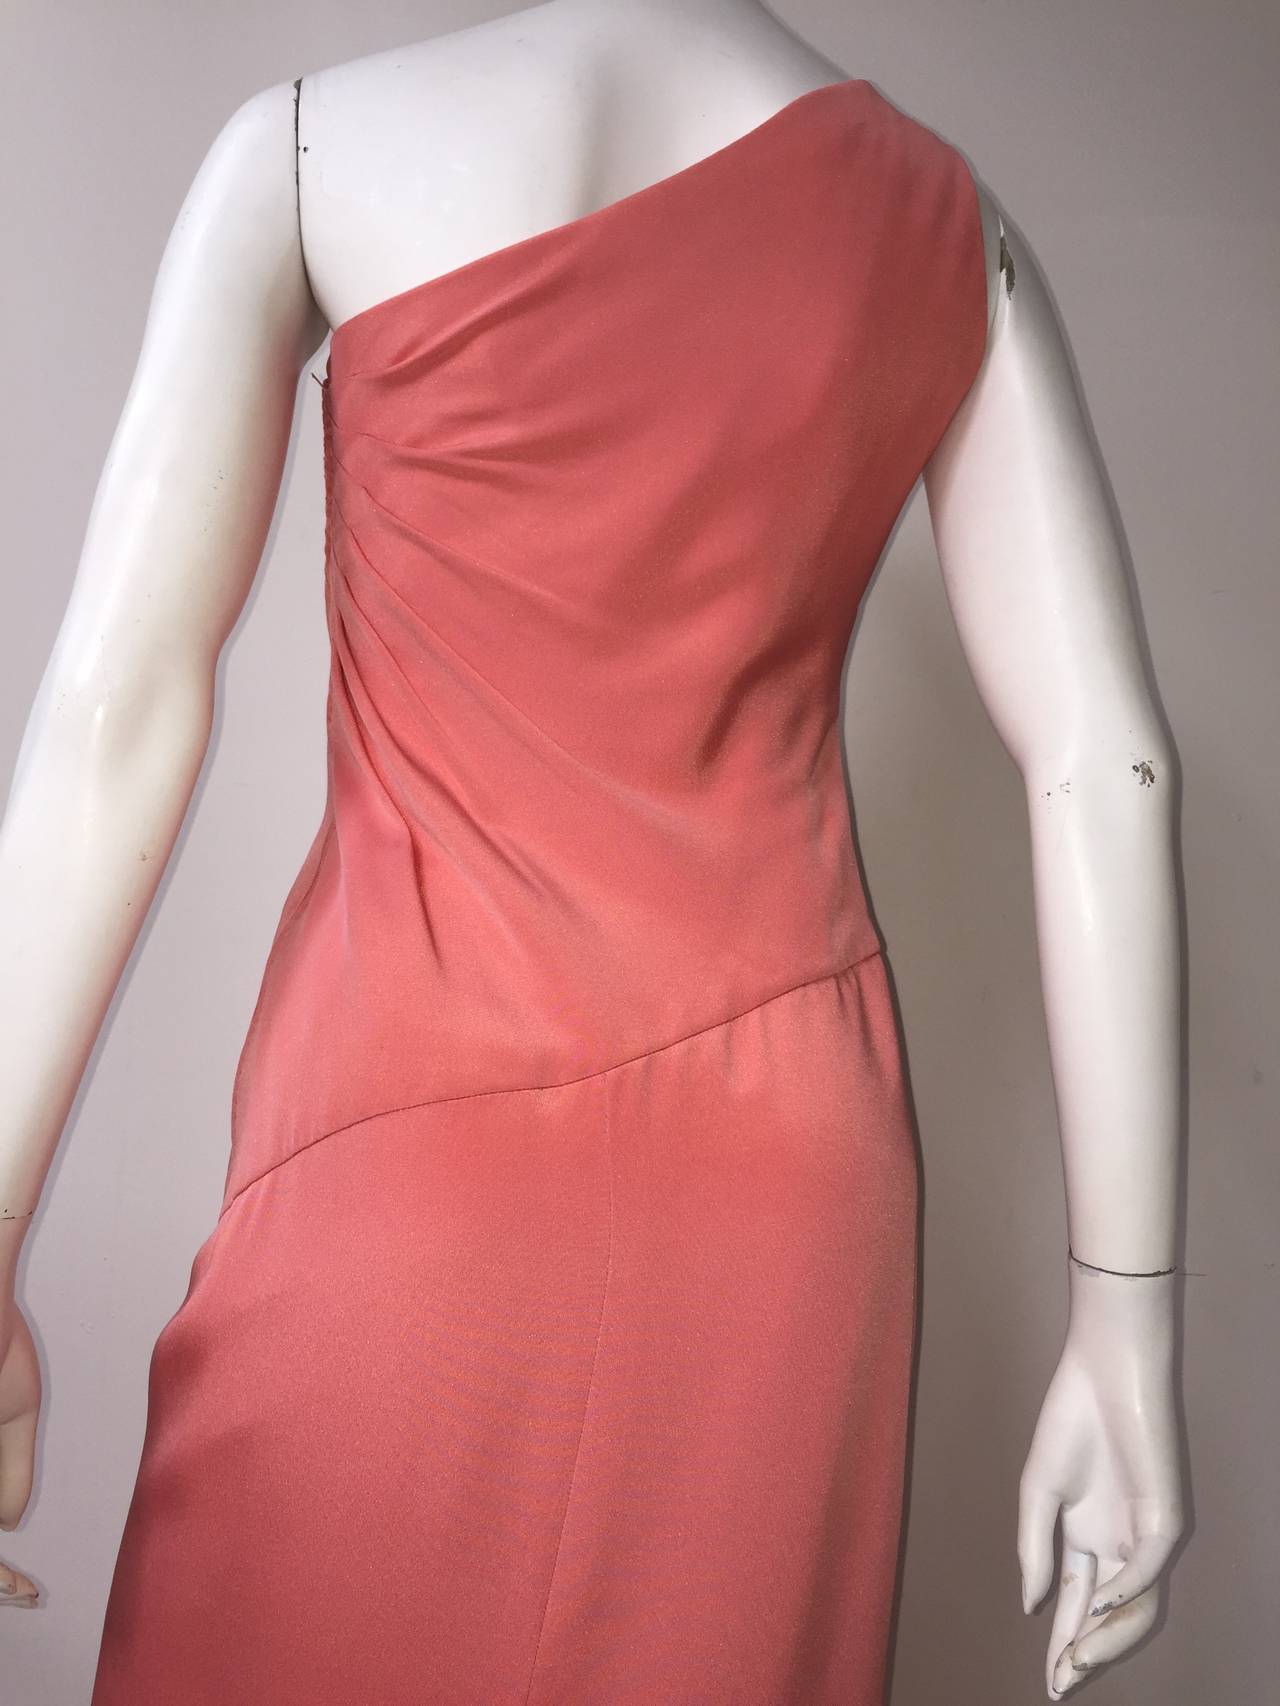 Carolyne Roehm for Sak's Fifth Avenue 1980s Coral Gown Size 6. For Sale 1